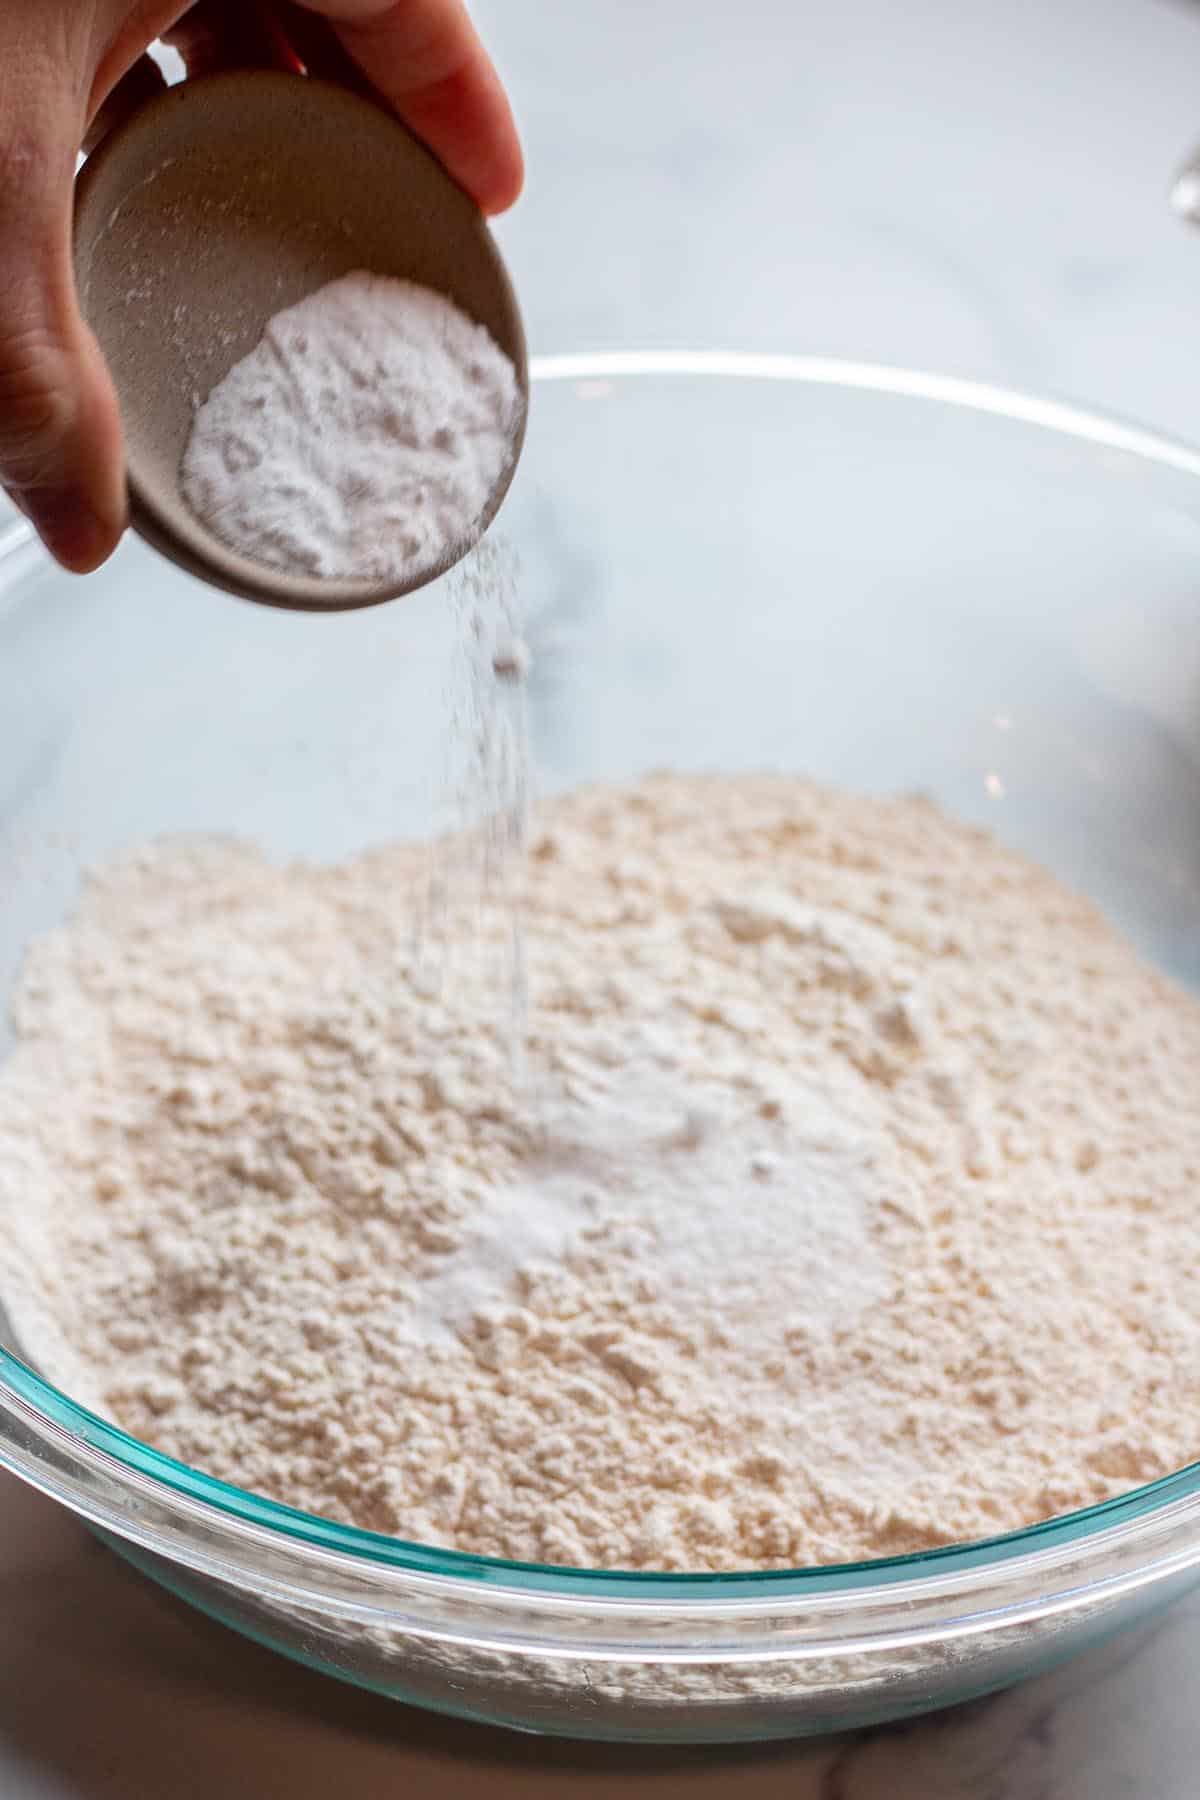 Baking soda being added to a bowl of flour.